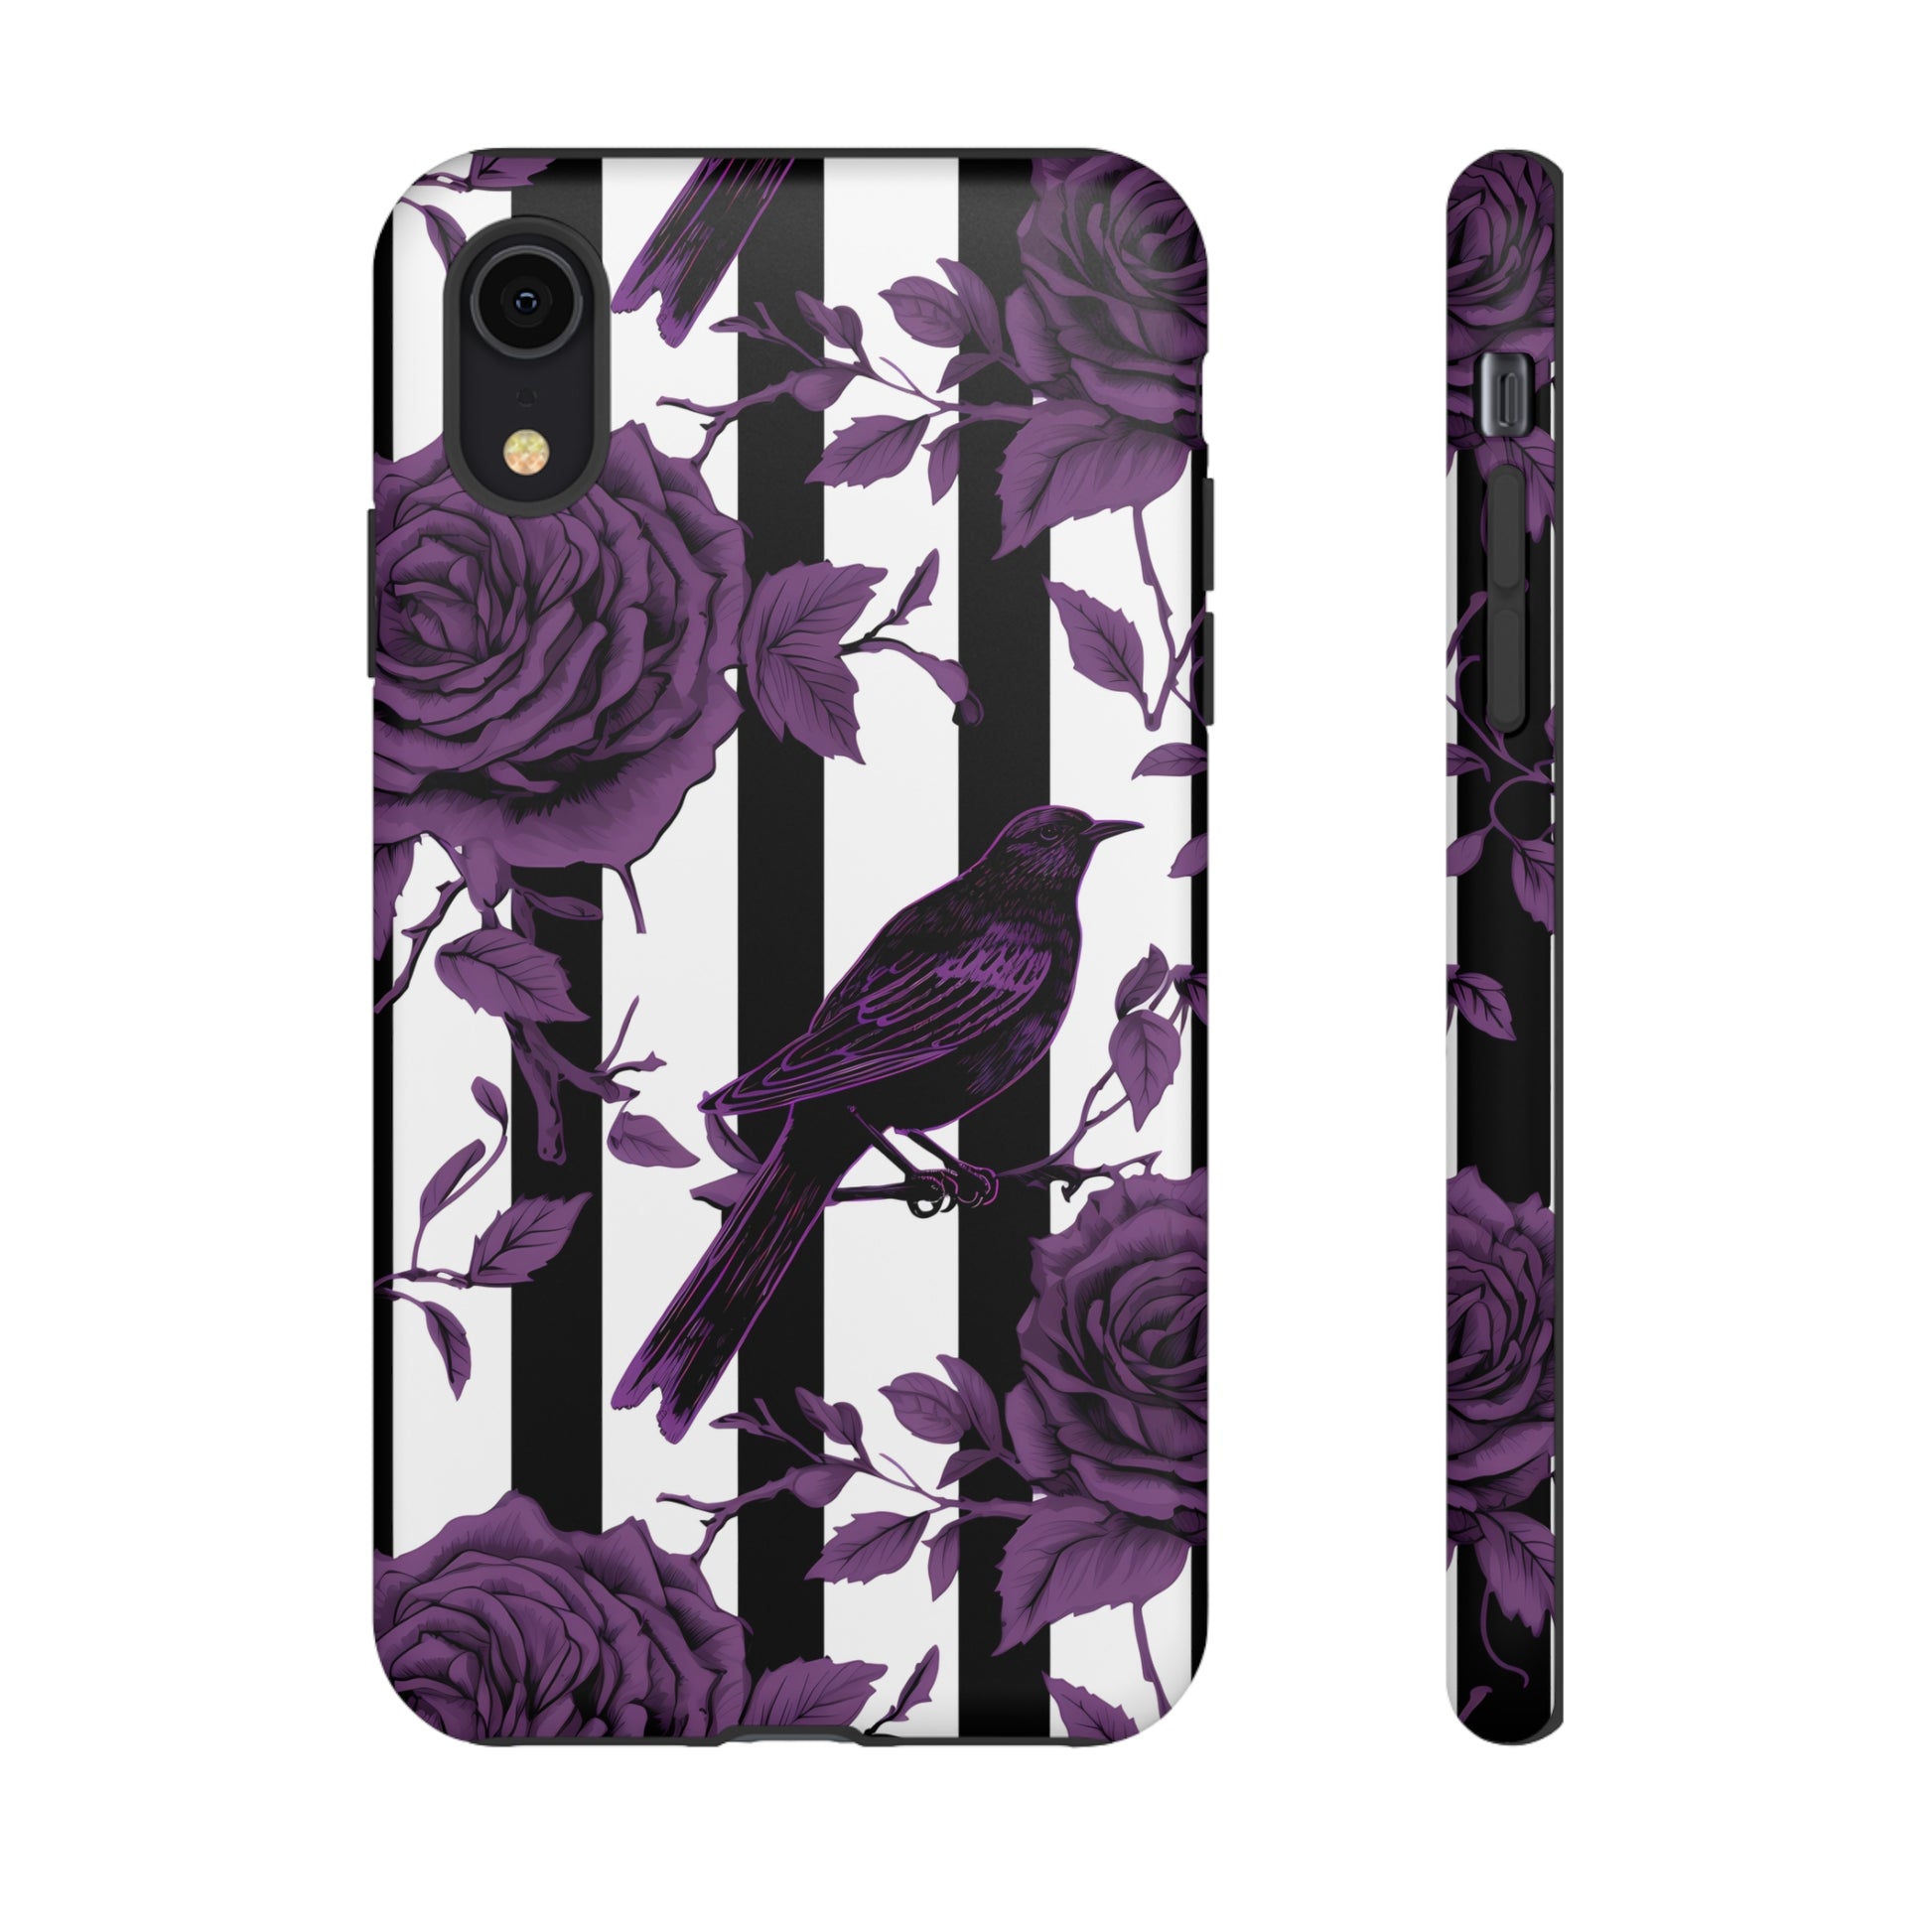 Striped Crows and Roses Tough Cases for iPhone Samsung Google PhonesPhone CaseVTZdesignsiPhone XRMatteAccessoriescrowsGlossy